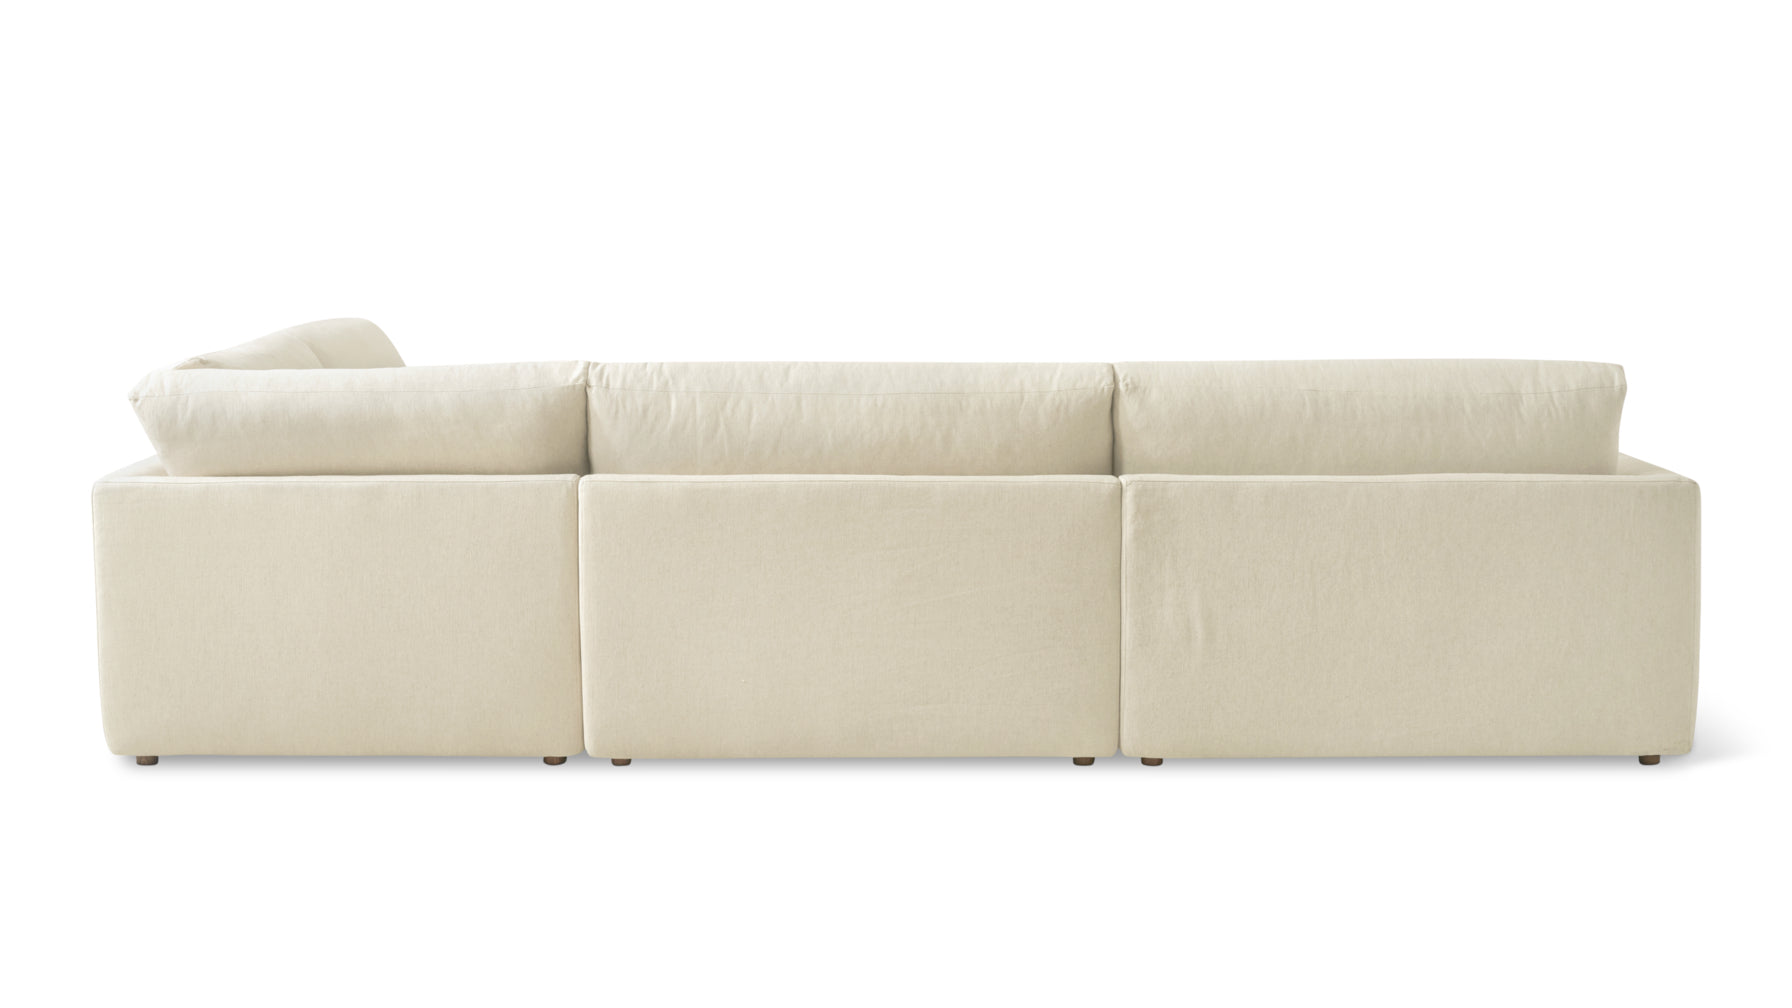 Wind Down 4-Piece Modular Sectional, Right, Beach - Image 4